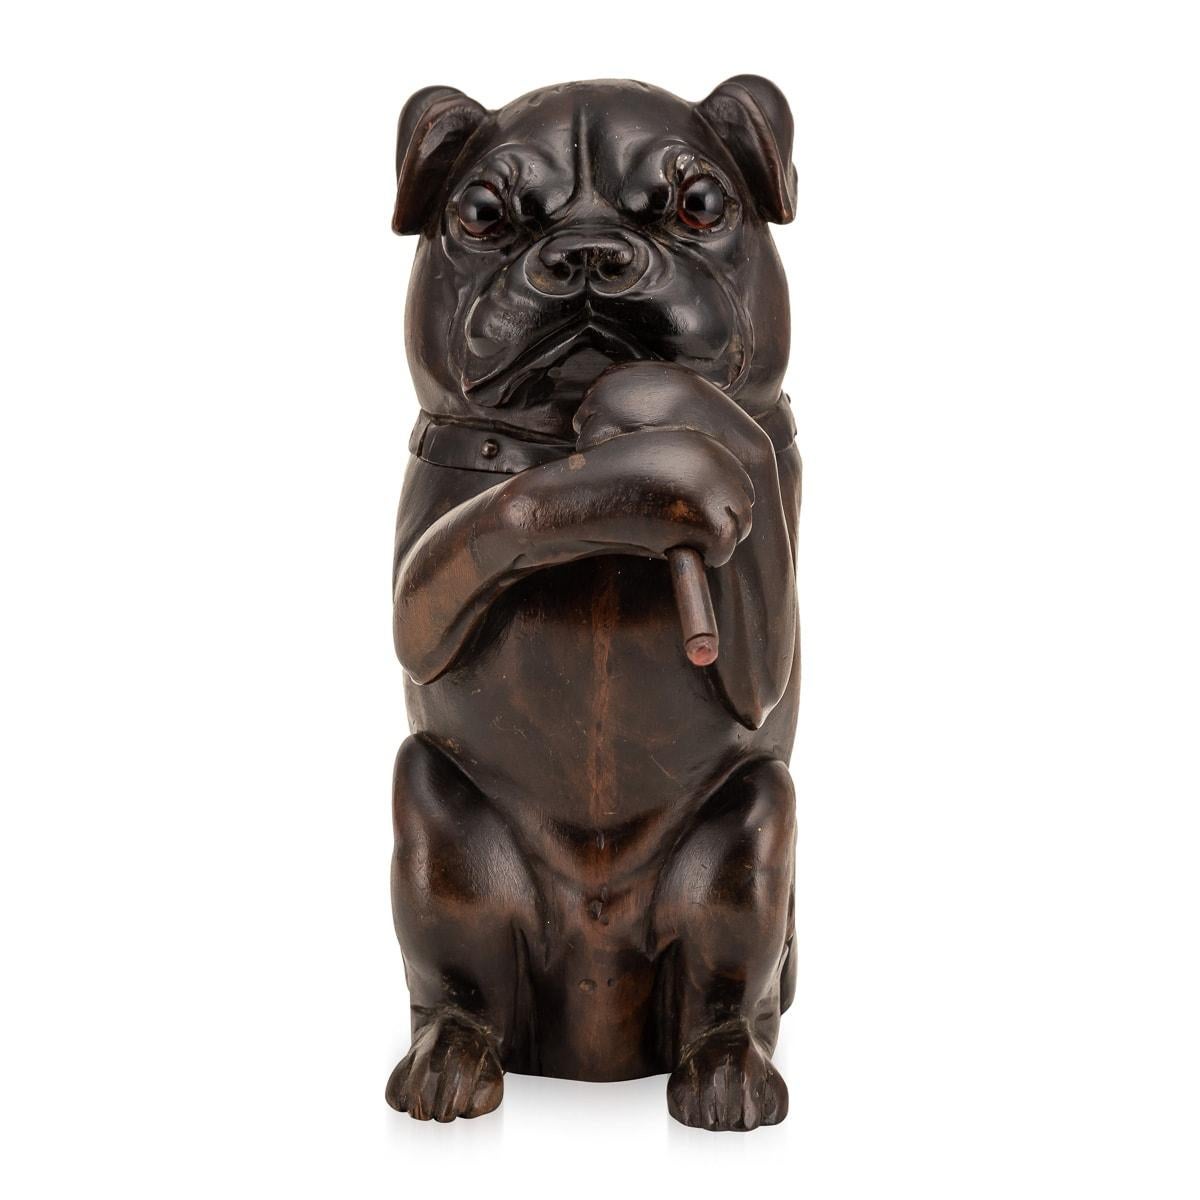 Antique early-20th Century Victorian lignum vitae bulldog tobacco jar featuring a carved bulldog sat on it's heind legs smoking. The entire head lifts to reveal a metal liner in which tobacco was originally stored. A truly wonderful piece and a must